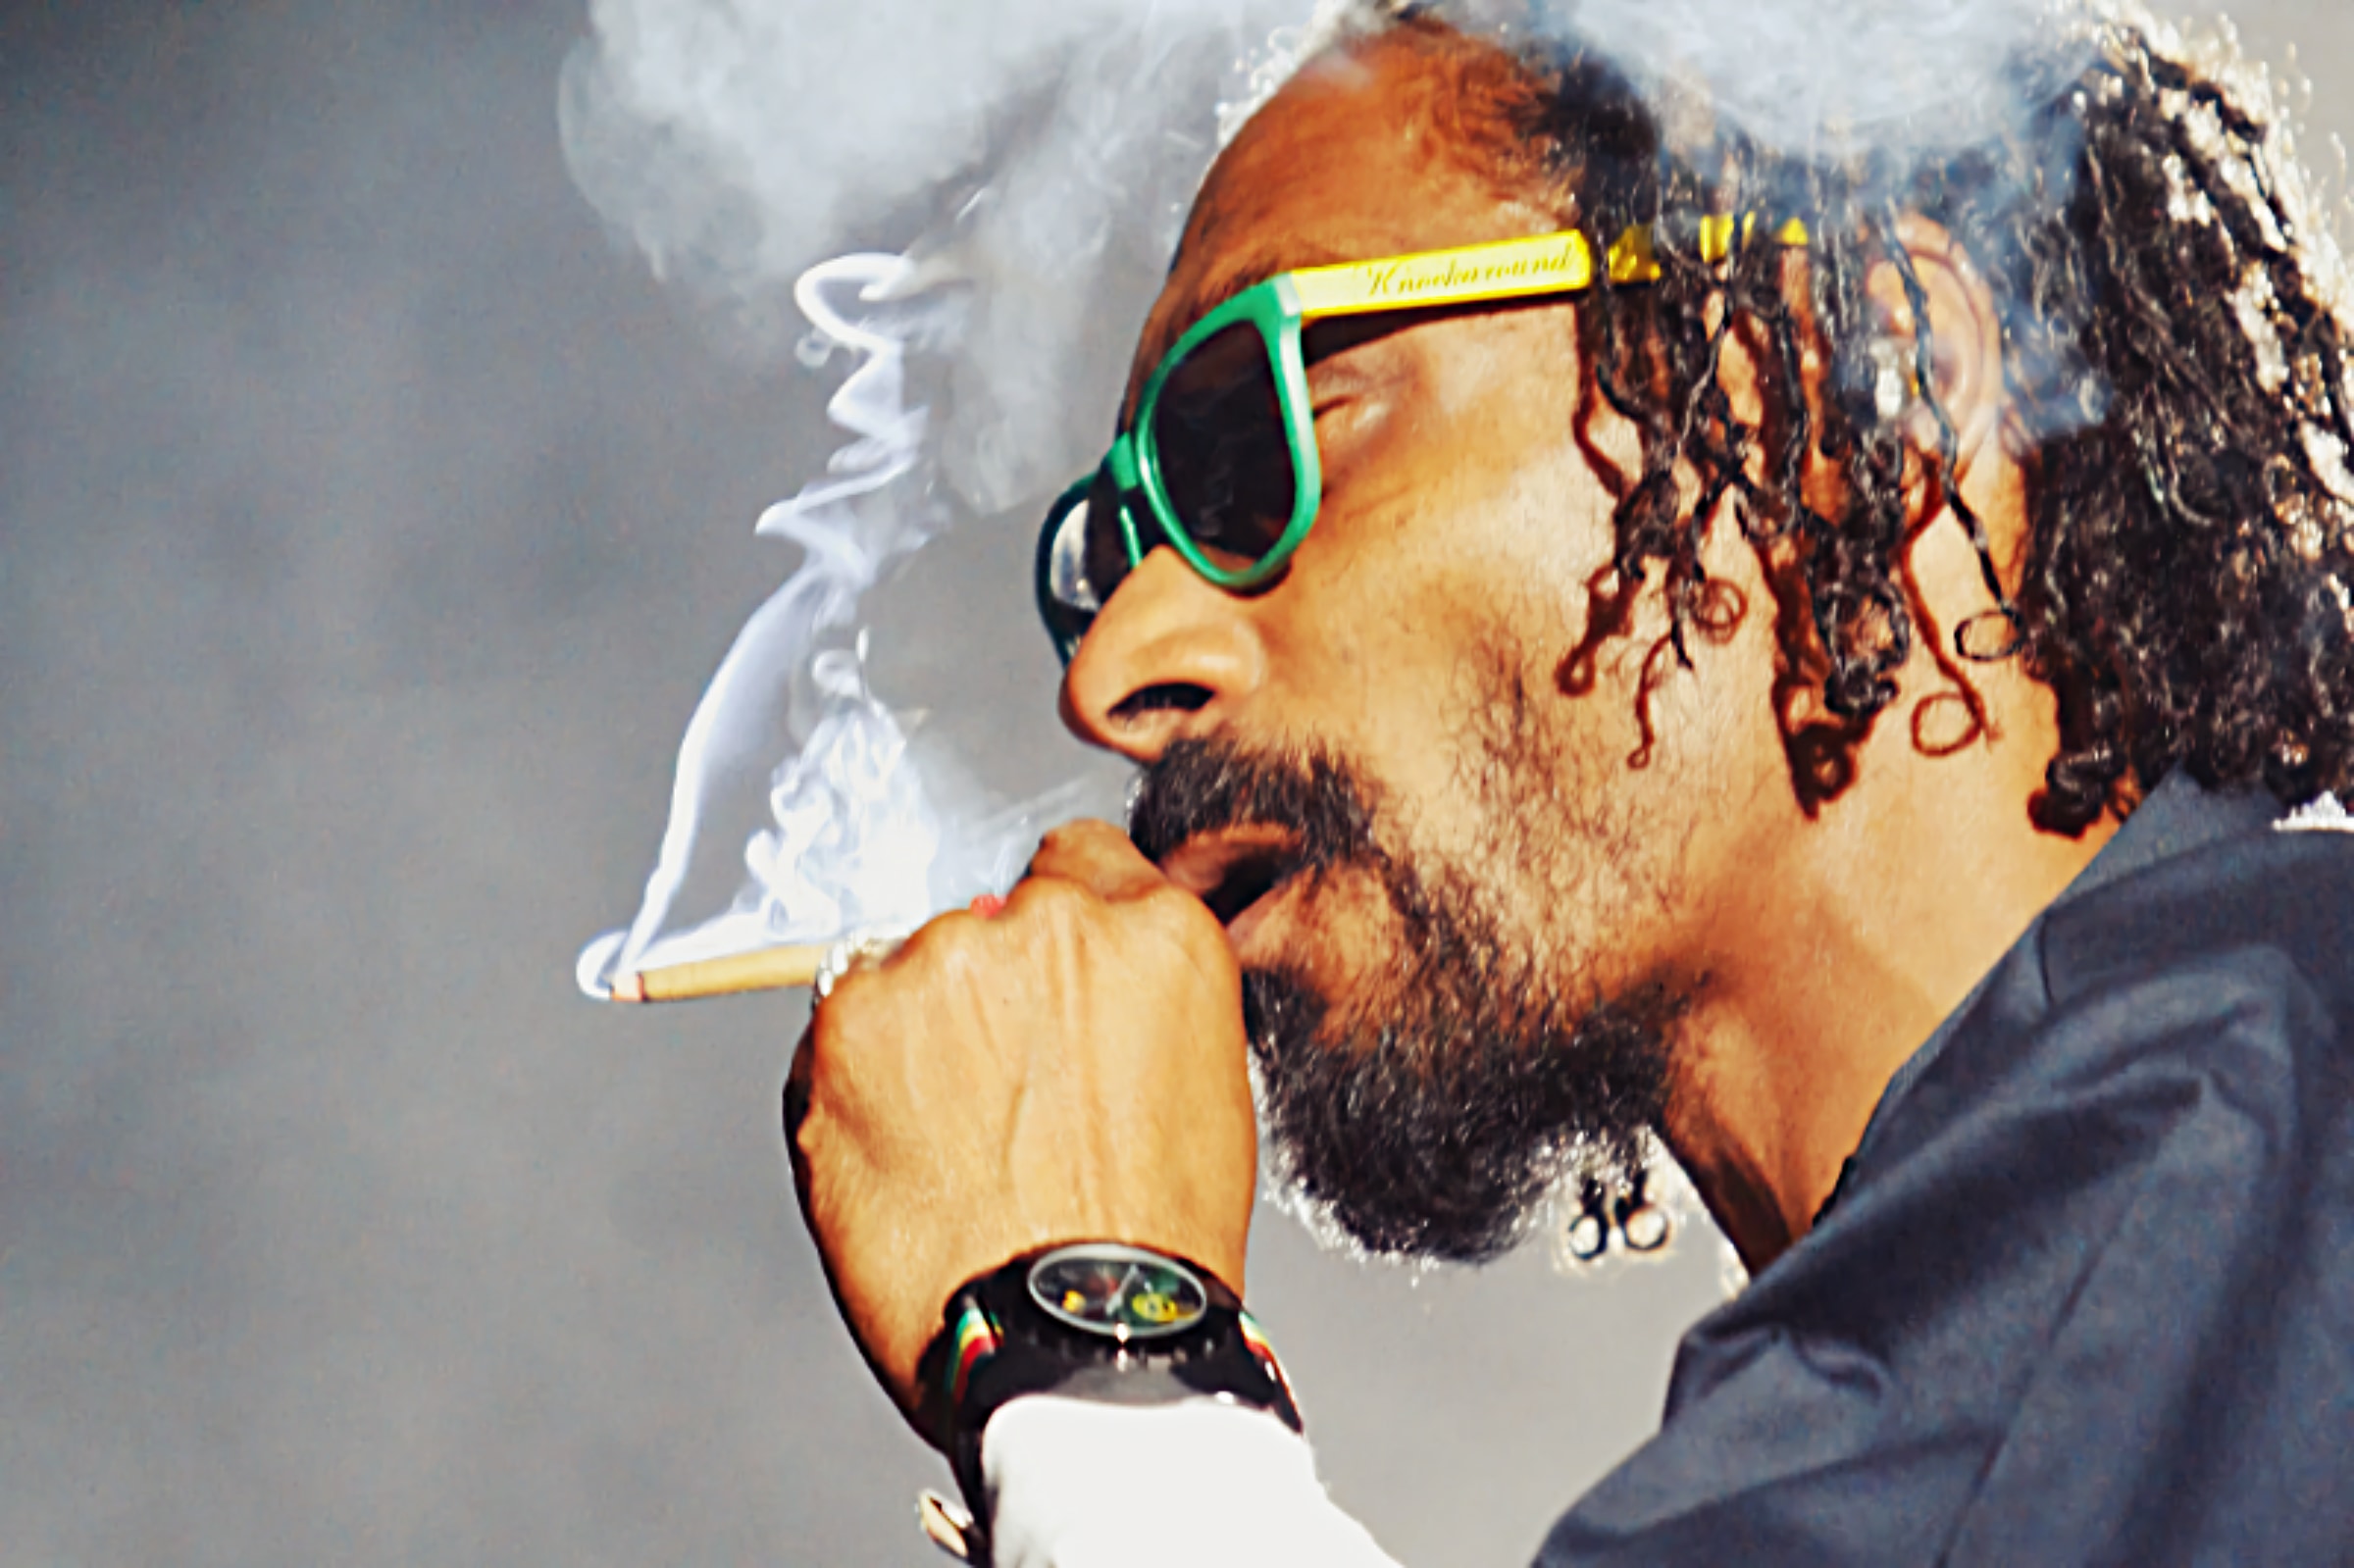 Snoop Dogg goes viral in a publicity stunt in which he quits smoking weed